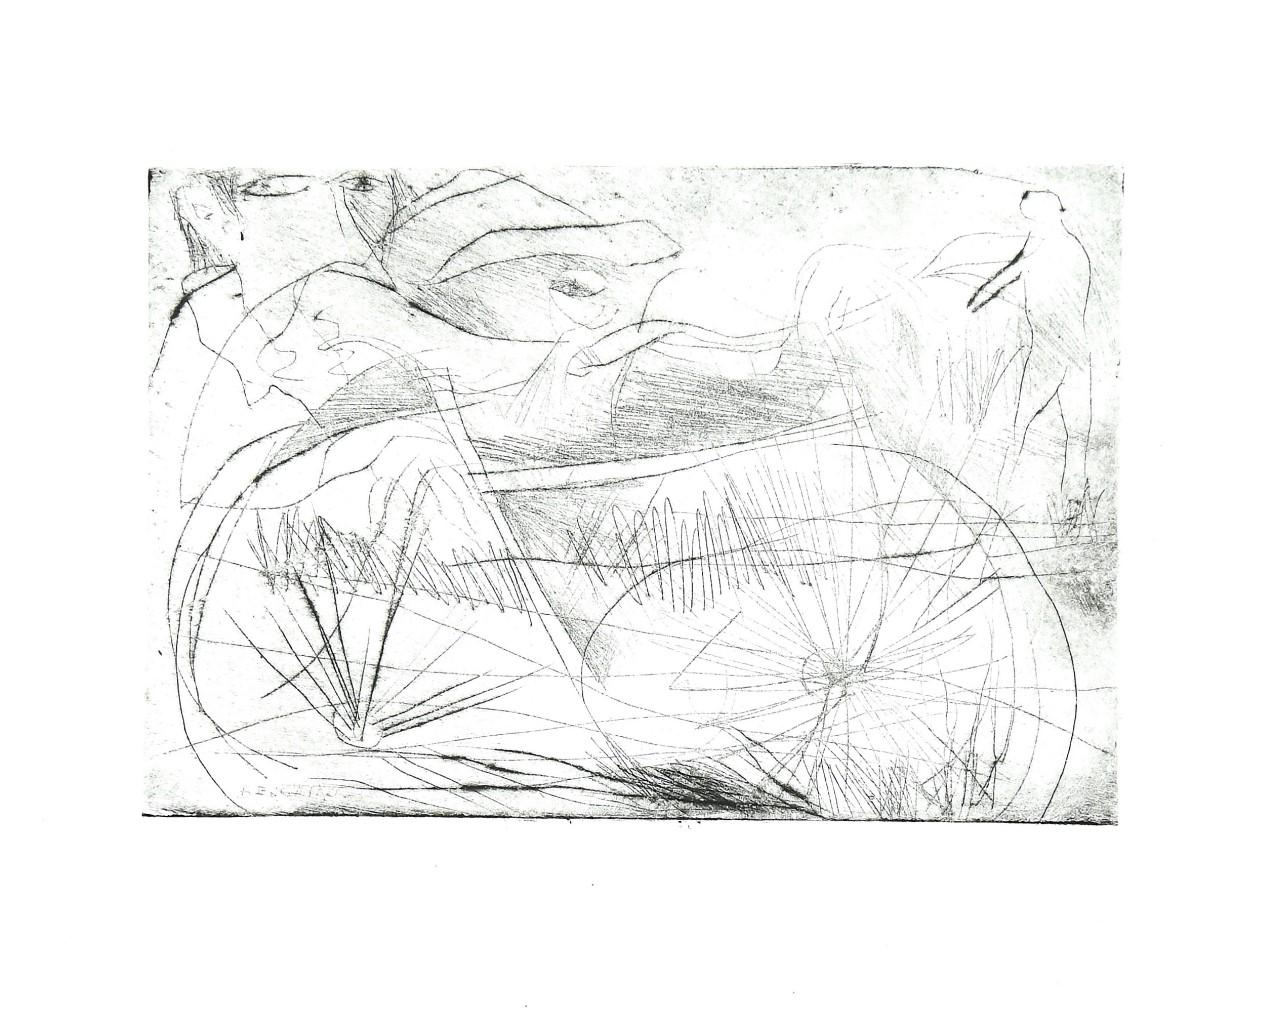 Bicycle is an original etching on cardboard realized by Danilo Bergamo in 1980s.

Hand-signed on the lower right margin on slab. 

Good conditions.

Danilo Bergamo (1938) after starting his artistic training in Macerata he moved to Rome with a